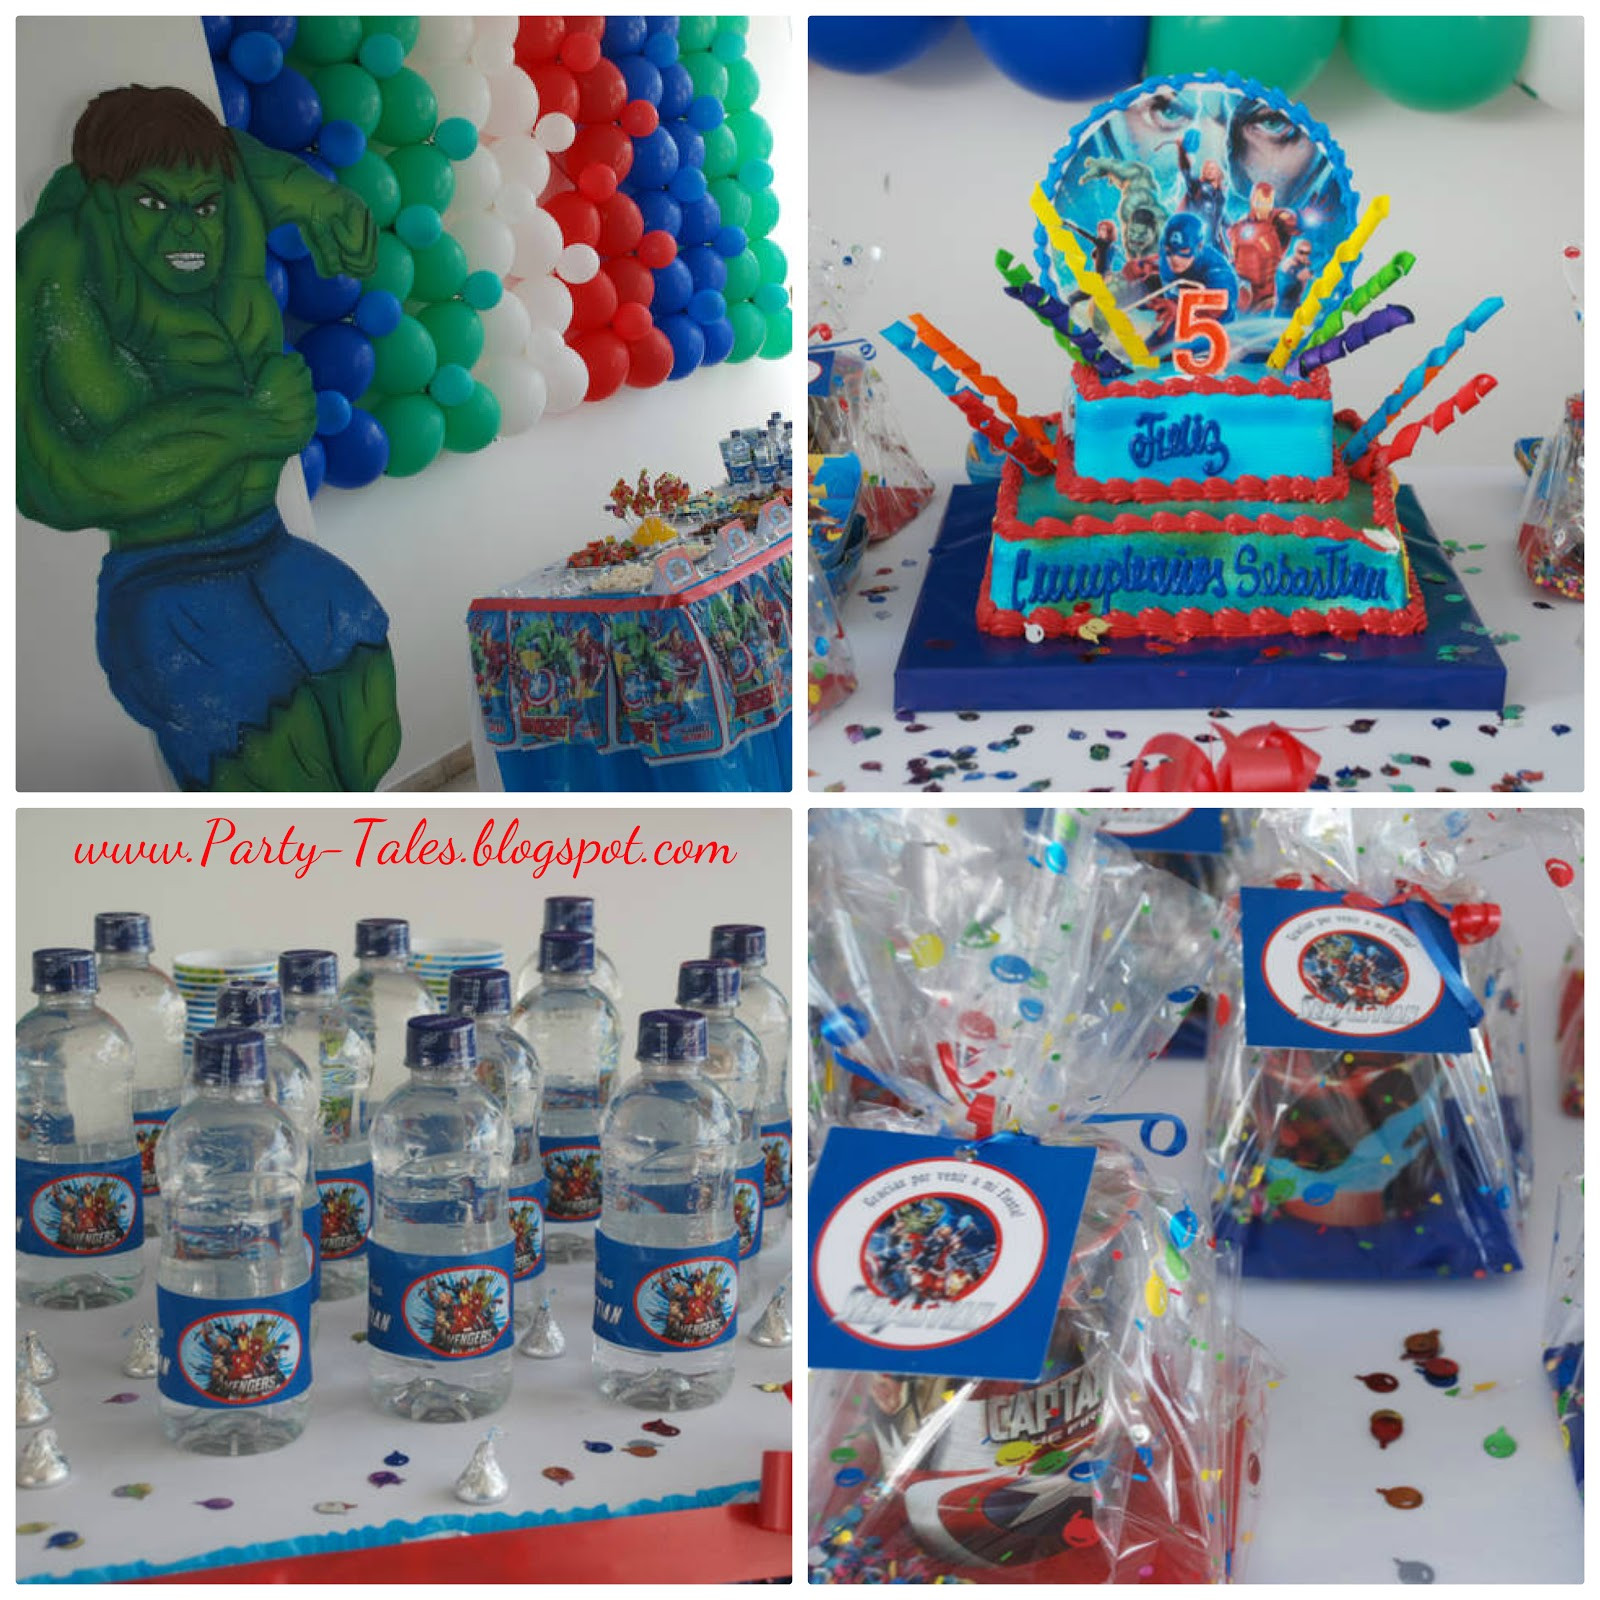 Avengers Birthday Party Supplies
 Party Tales Birthday Party The Avengers